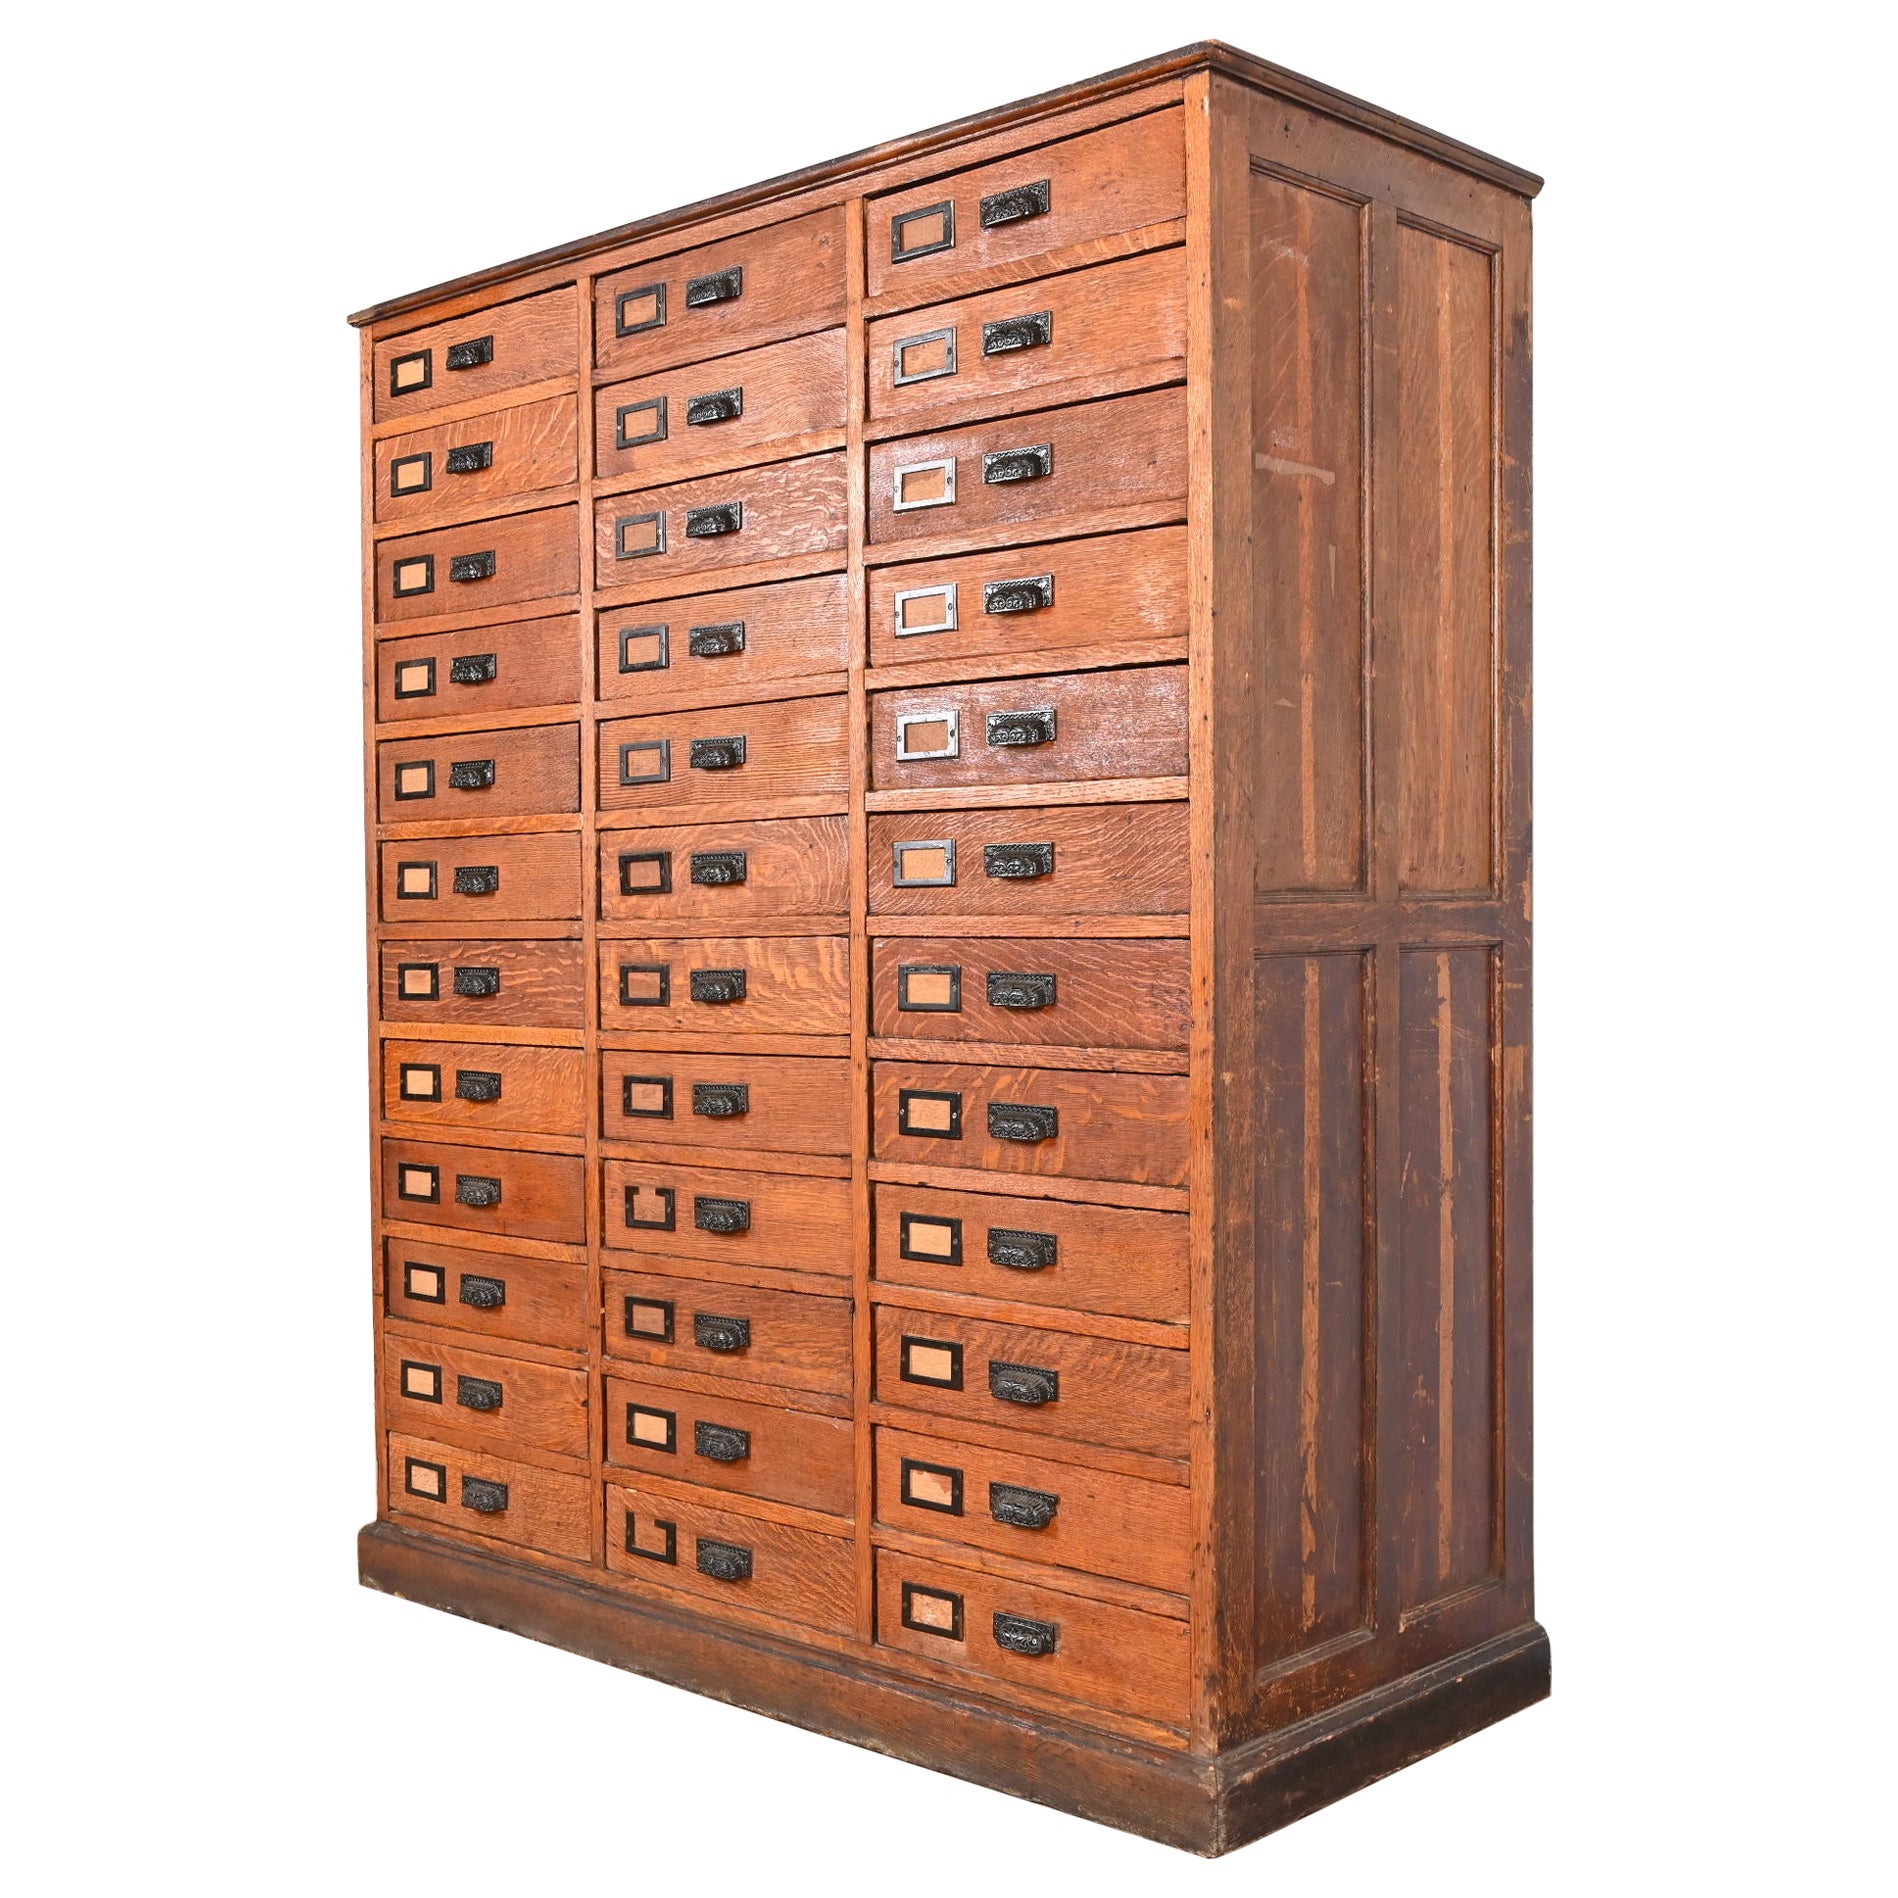 Monumental Antique Arts & Crafts Oak 36-Drawer File Cabinet or Chest of Drawers